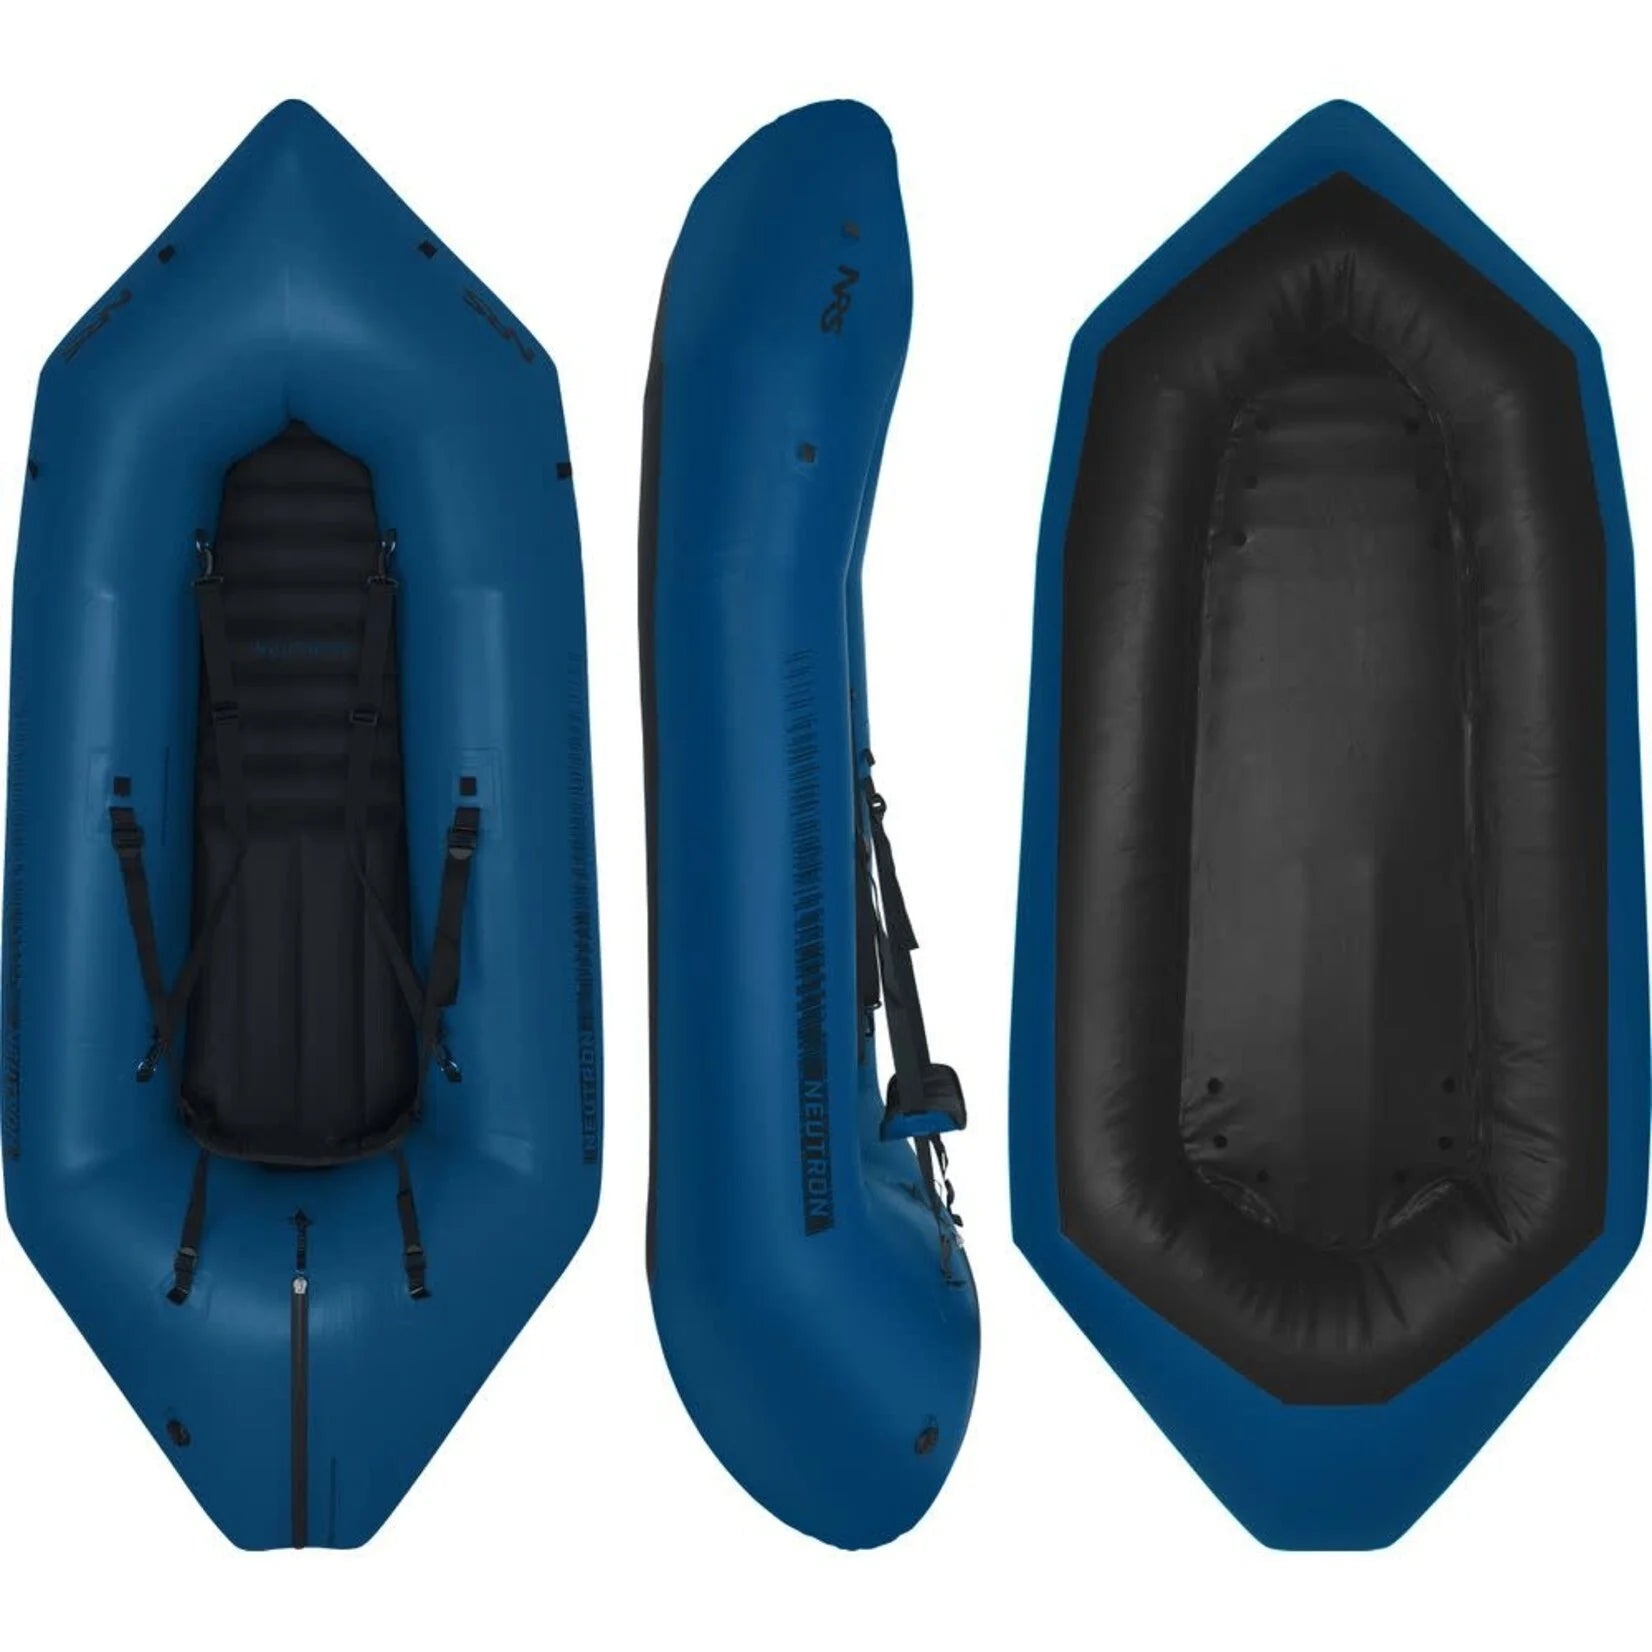 A blue NRS Neutron Packraft with a black seat, ideal for whitewater journeys.